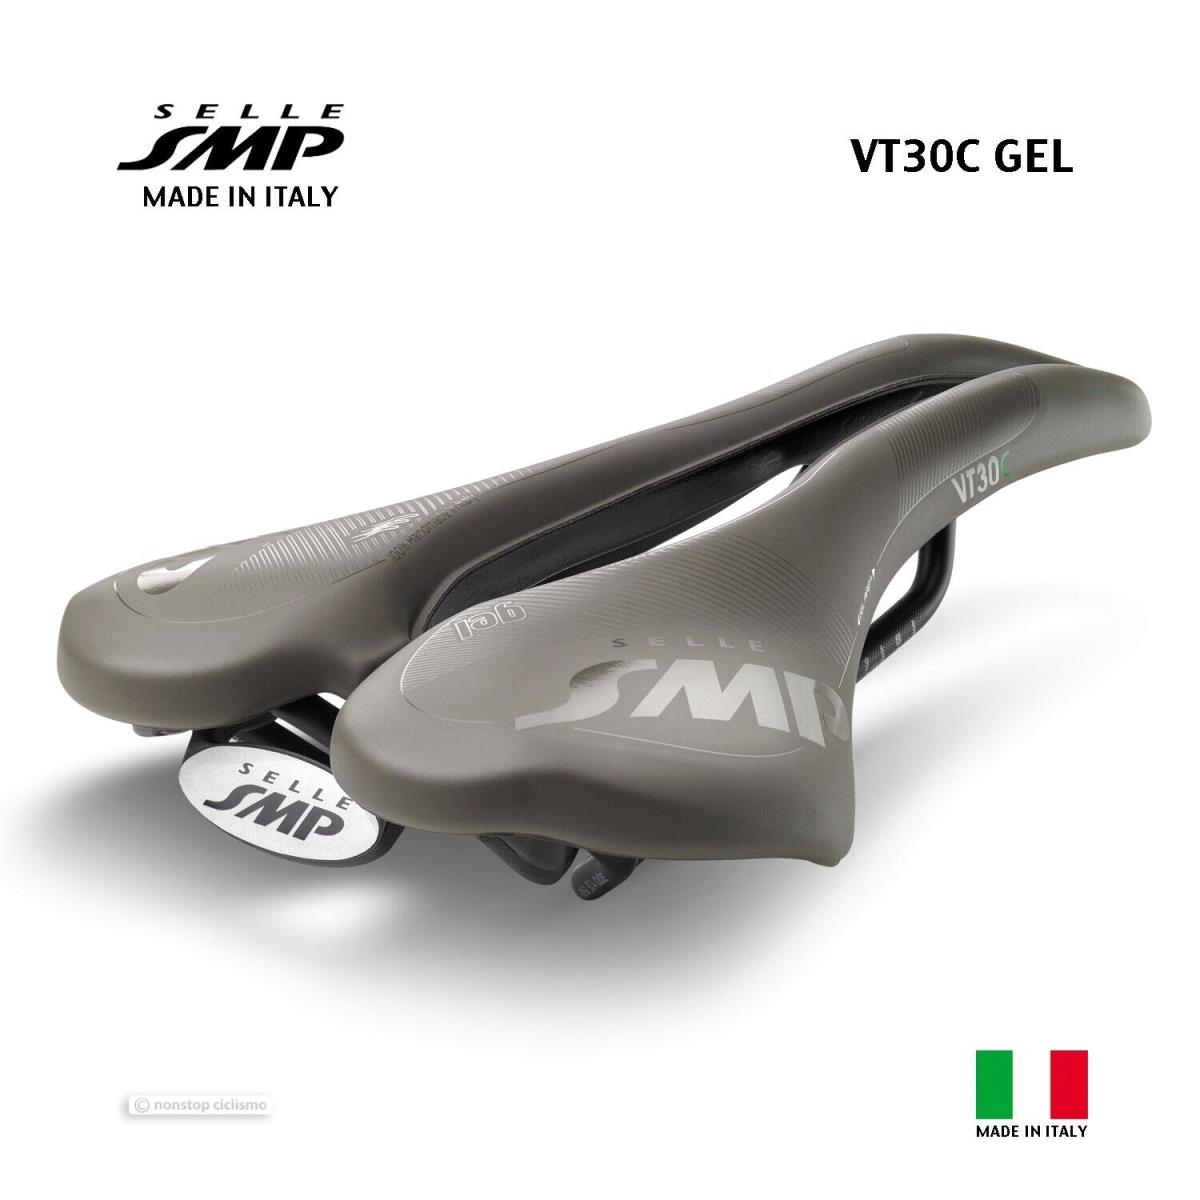 Selle Smp VT30C Gel Saddle : Grey-brown Gravel - Made IN Italy